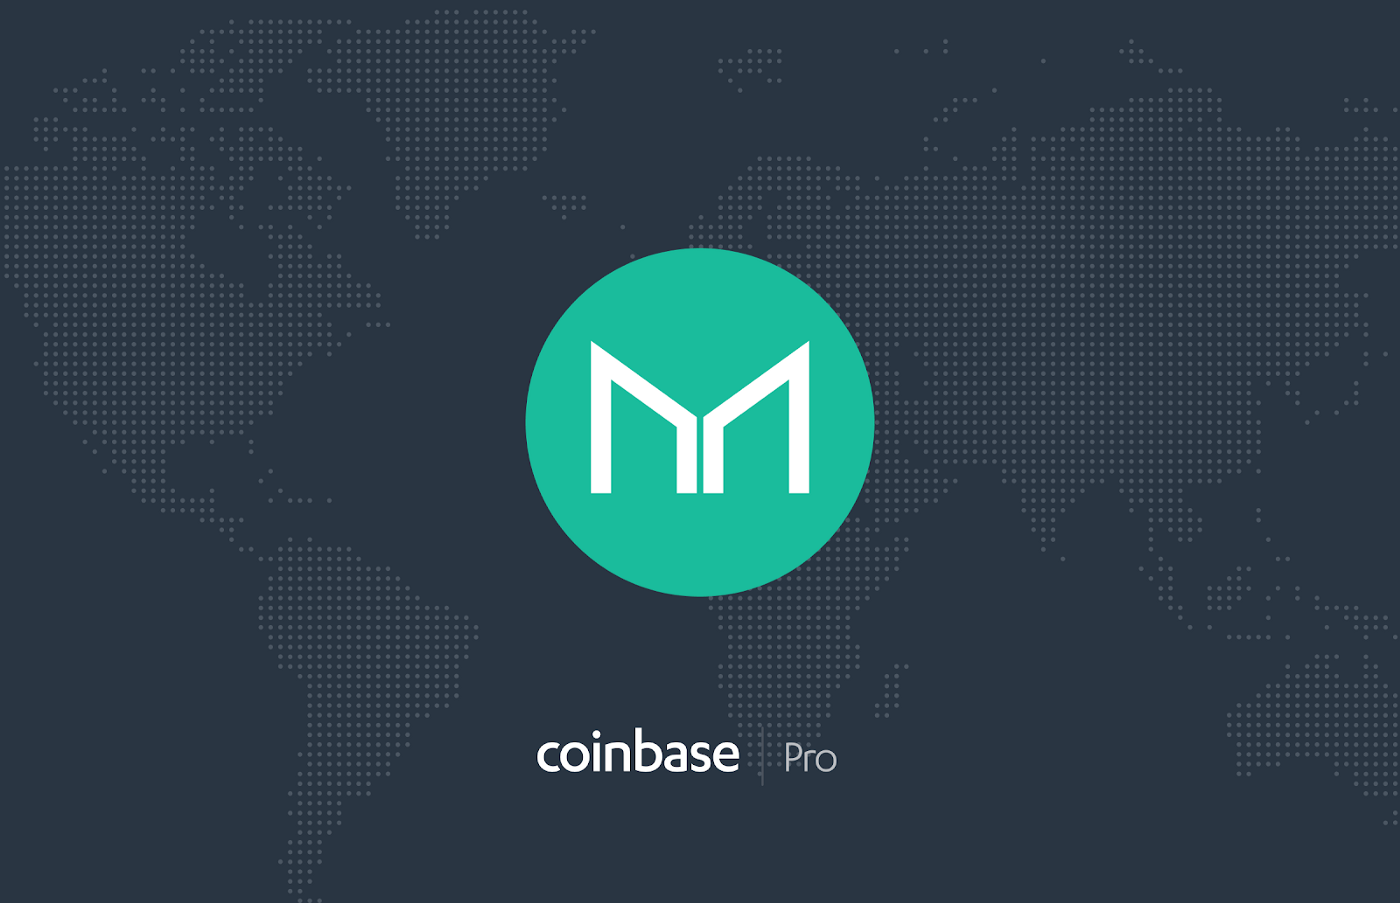 Maker (MKR) is launching on Coinbase Pro